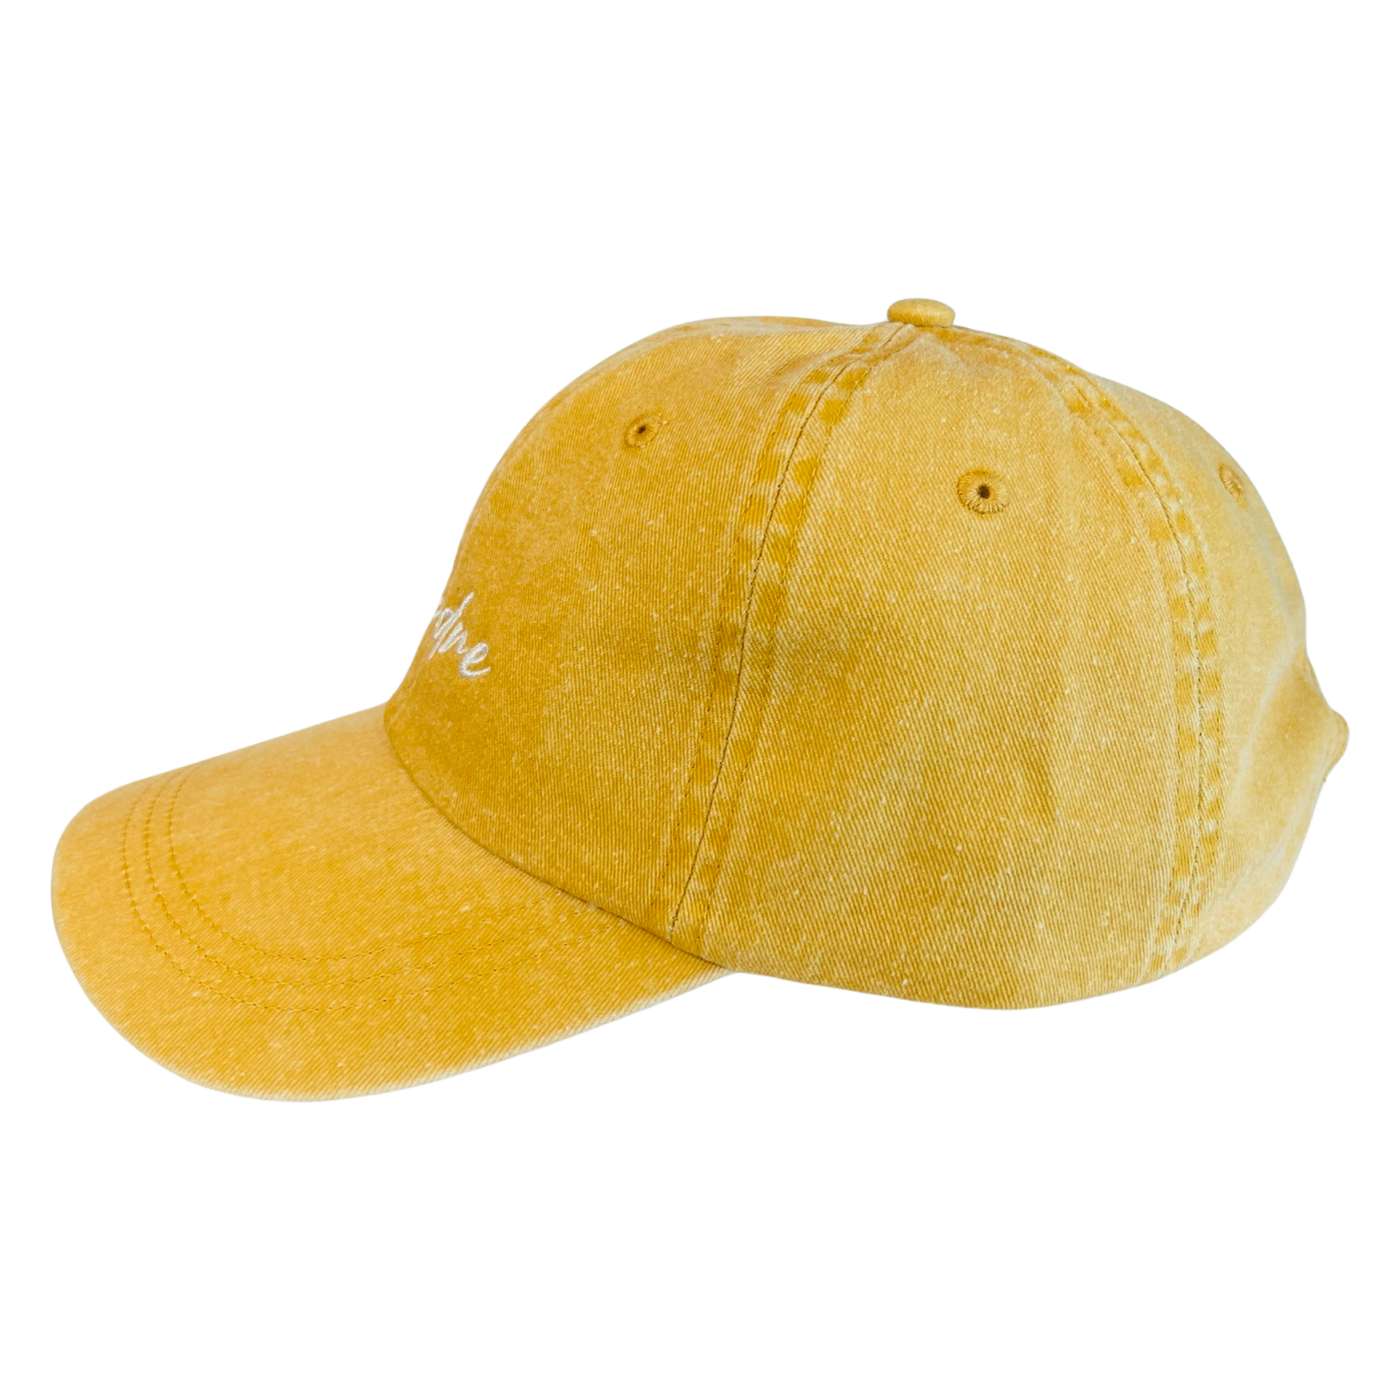 side view of a yellow hat with the word Madre in white lettering